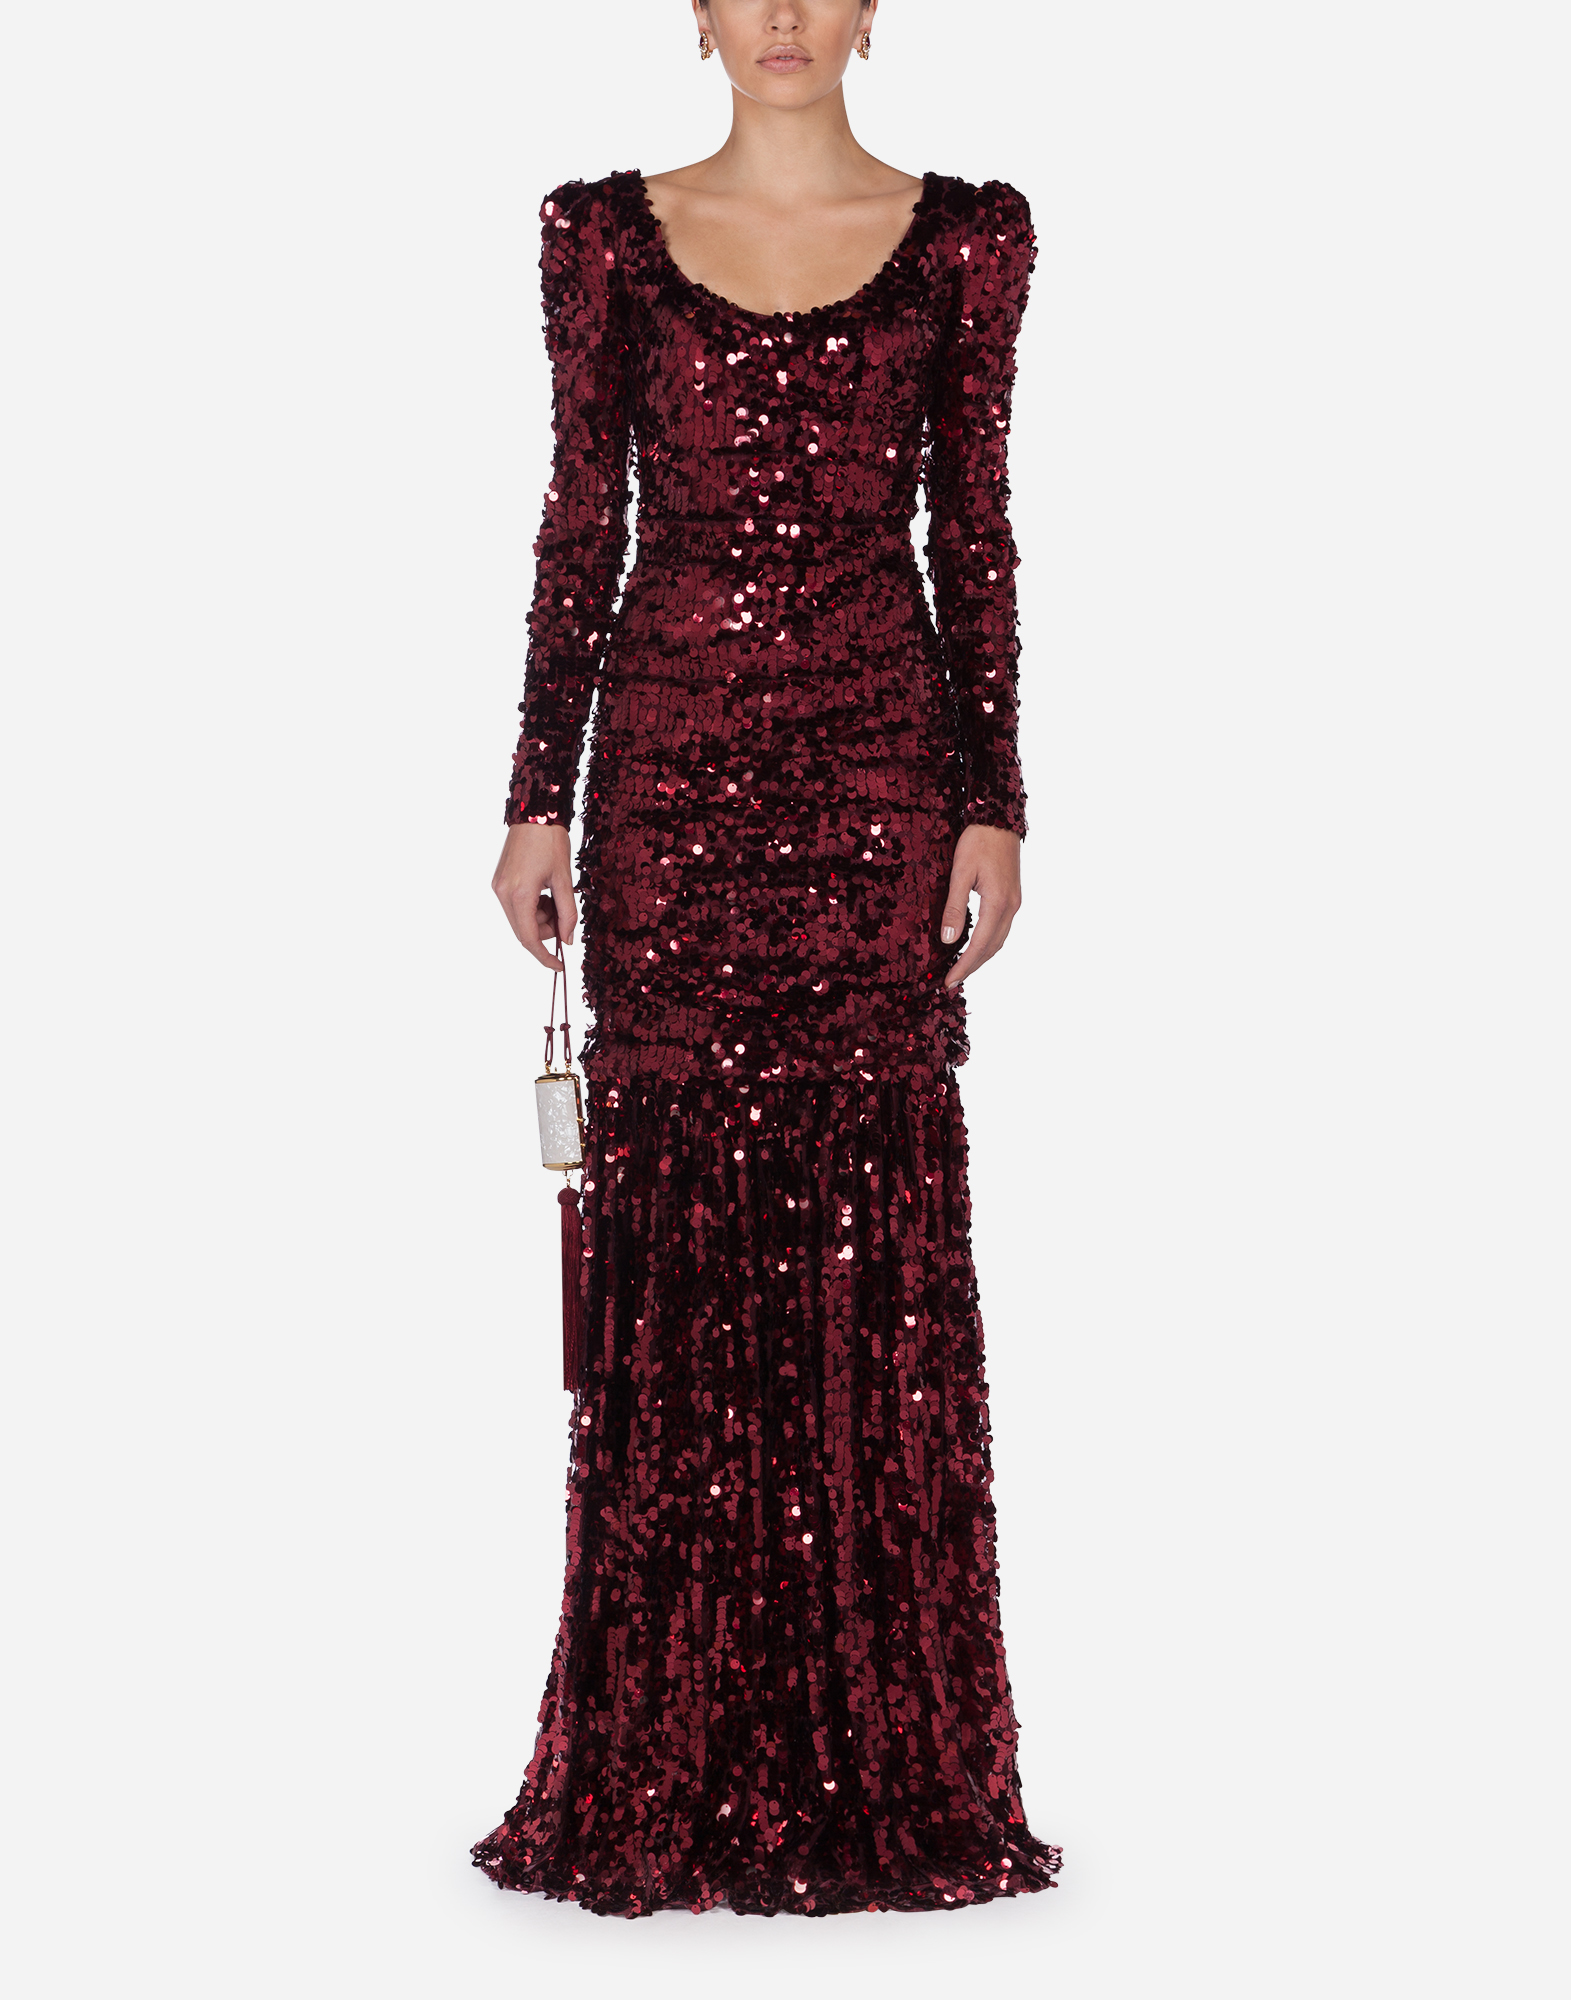 DOLCE & GABBANA LONG-SLEEVED DRESS WITH SEQUINED SLEEVES